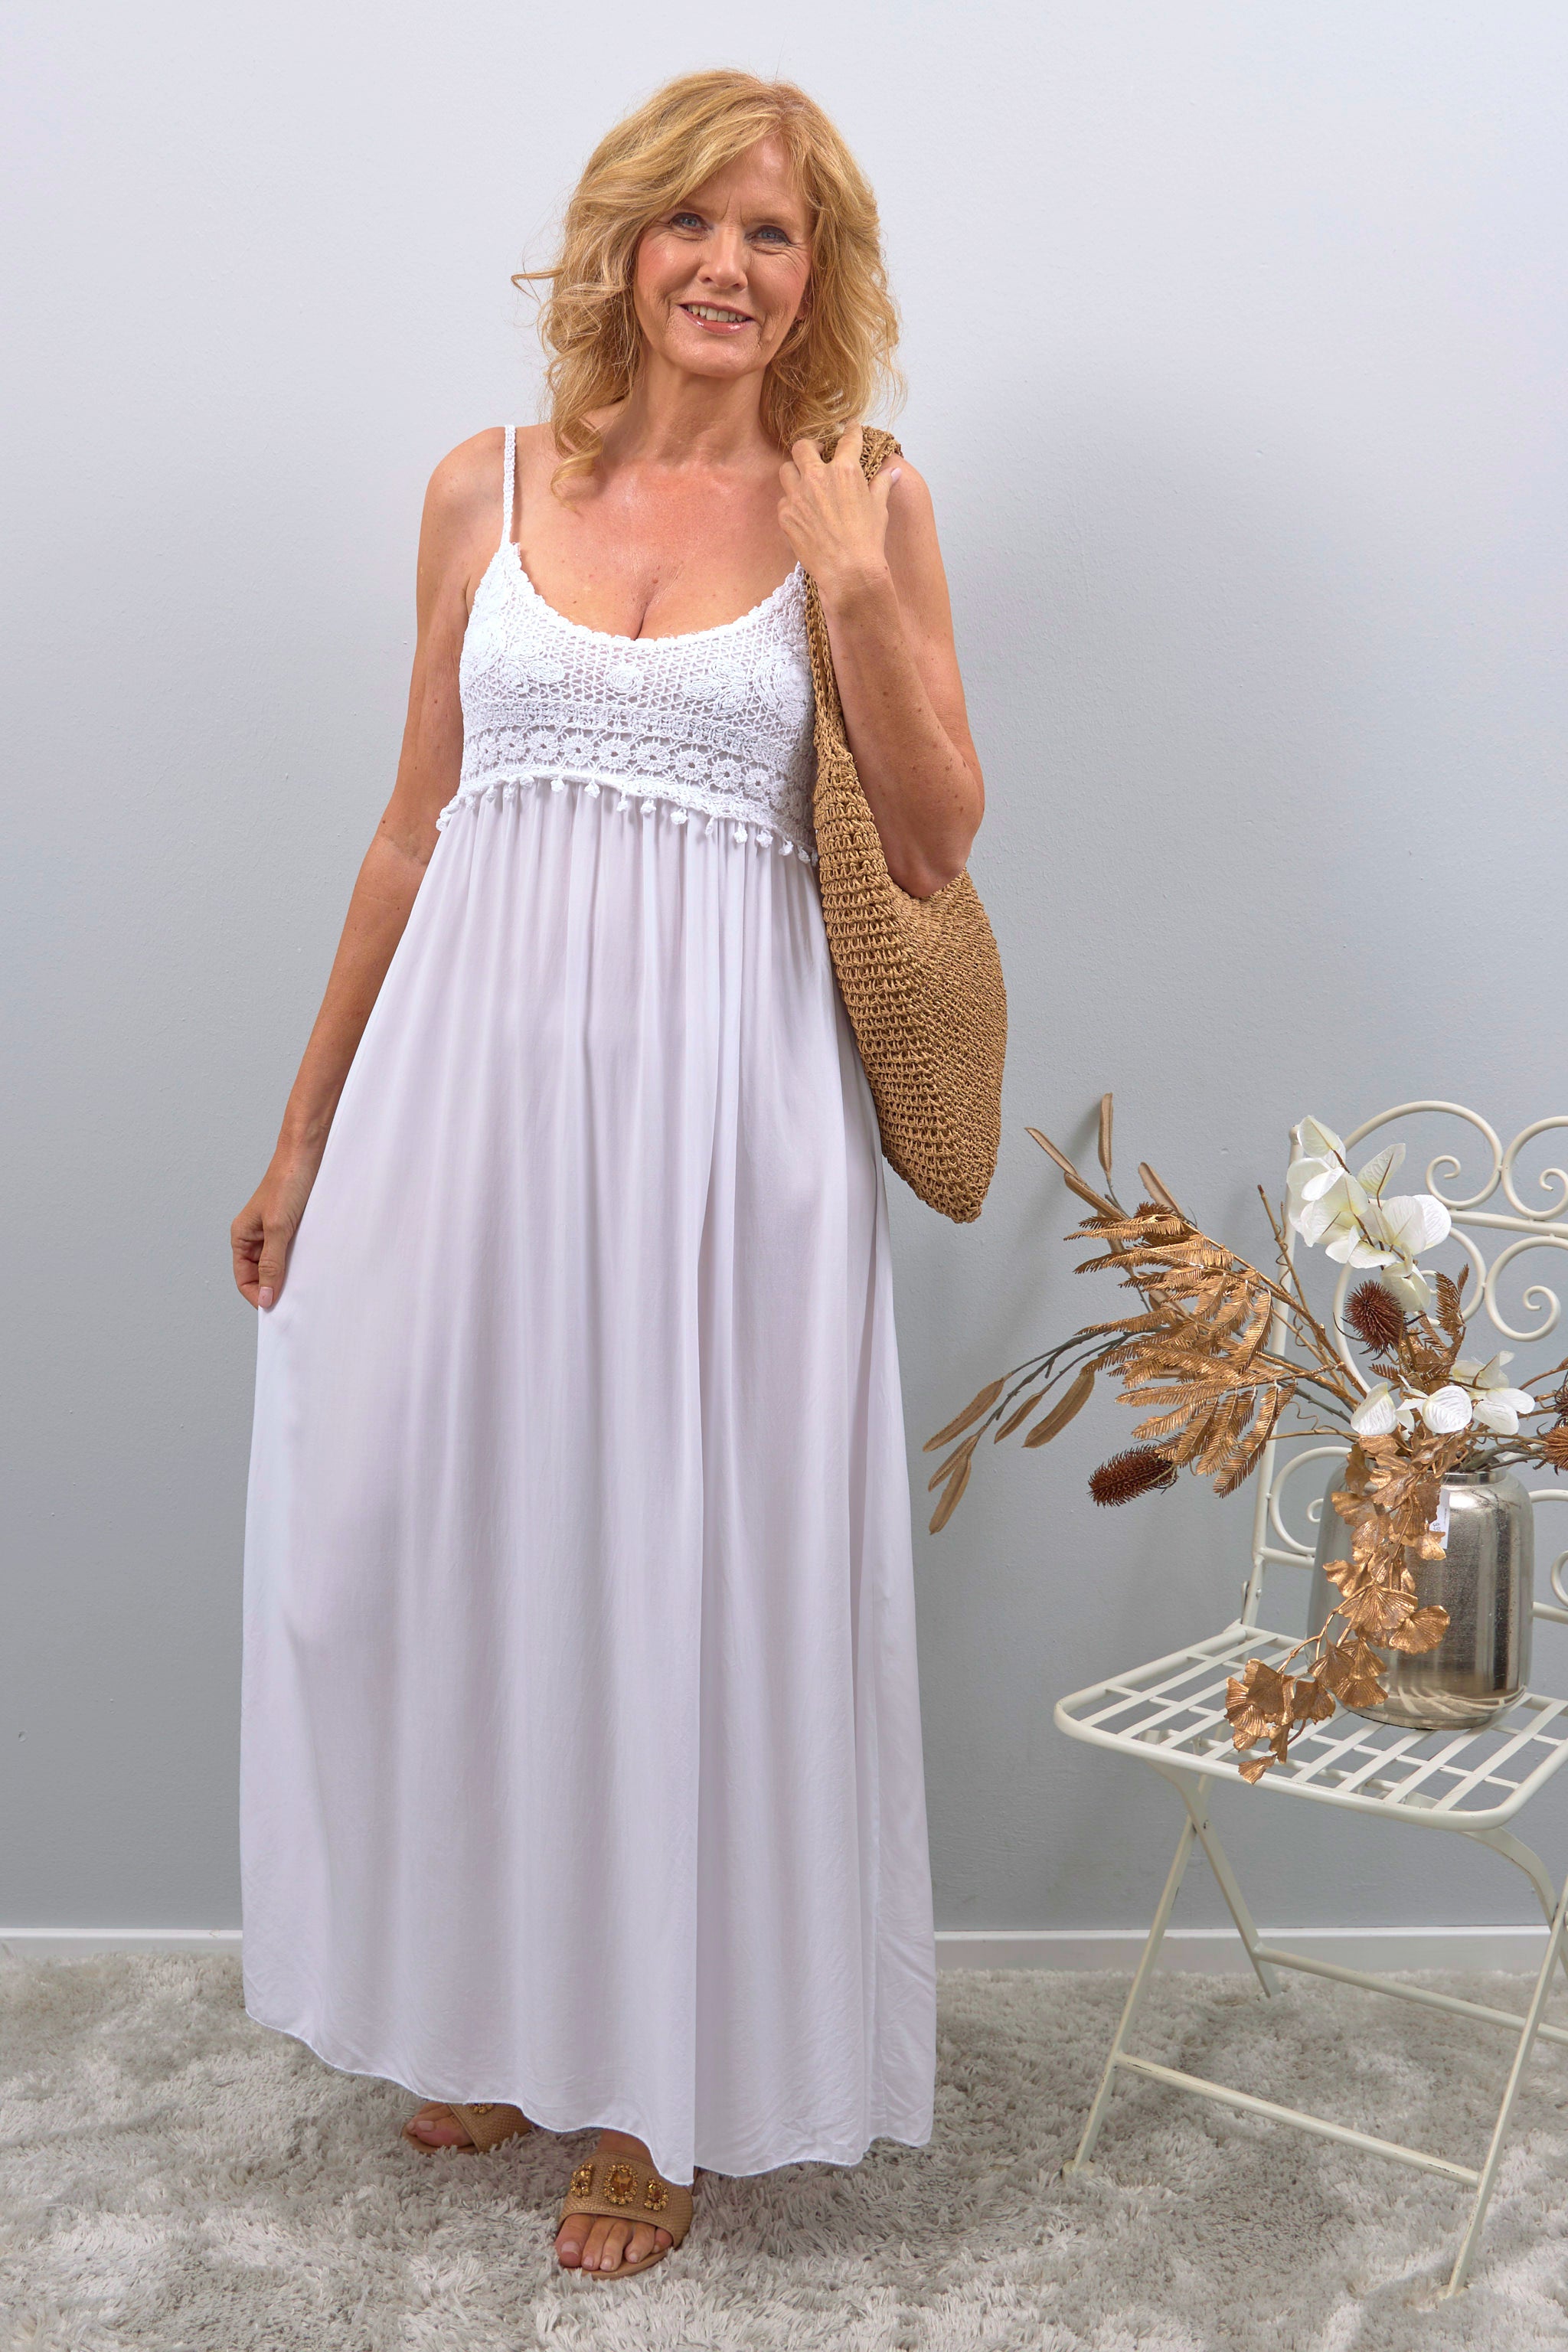 Dress with crochet top, white